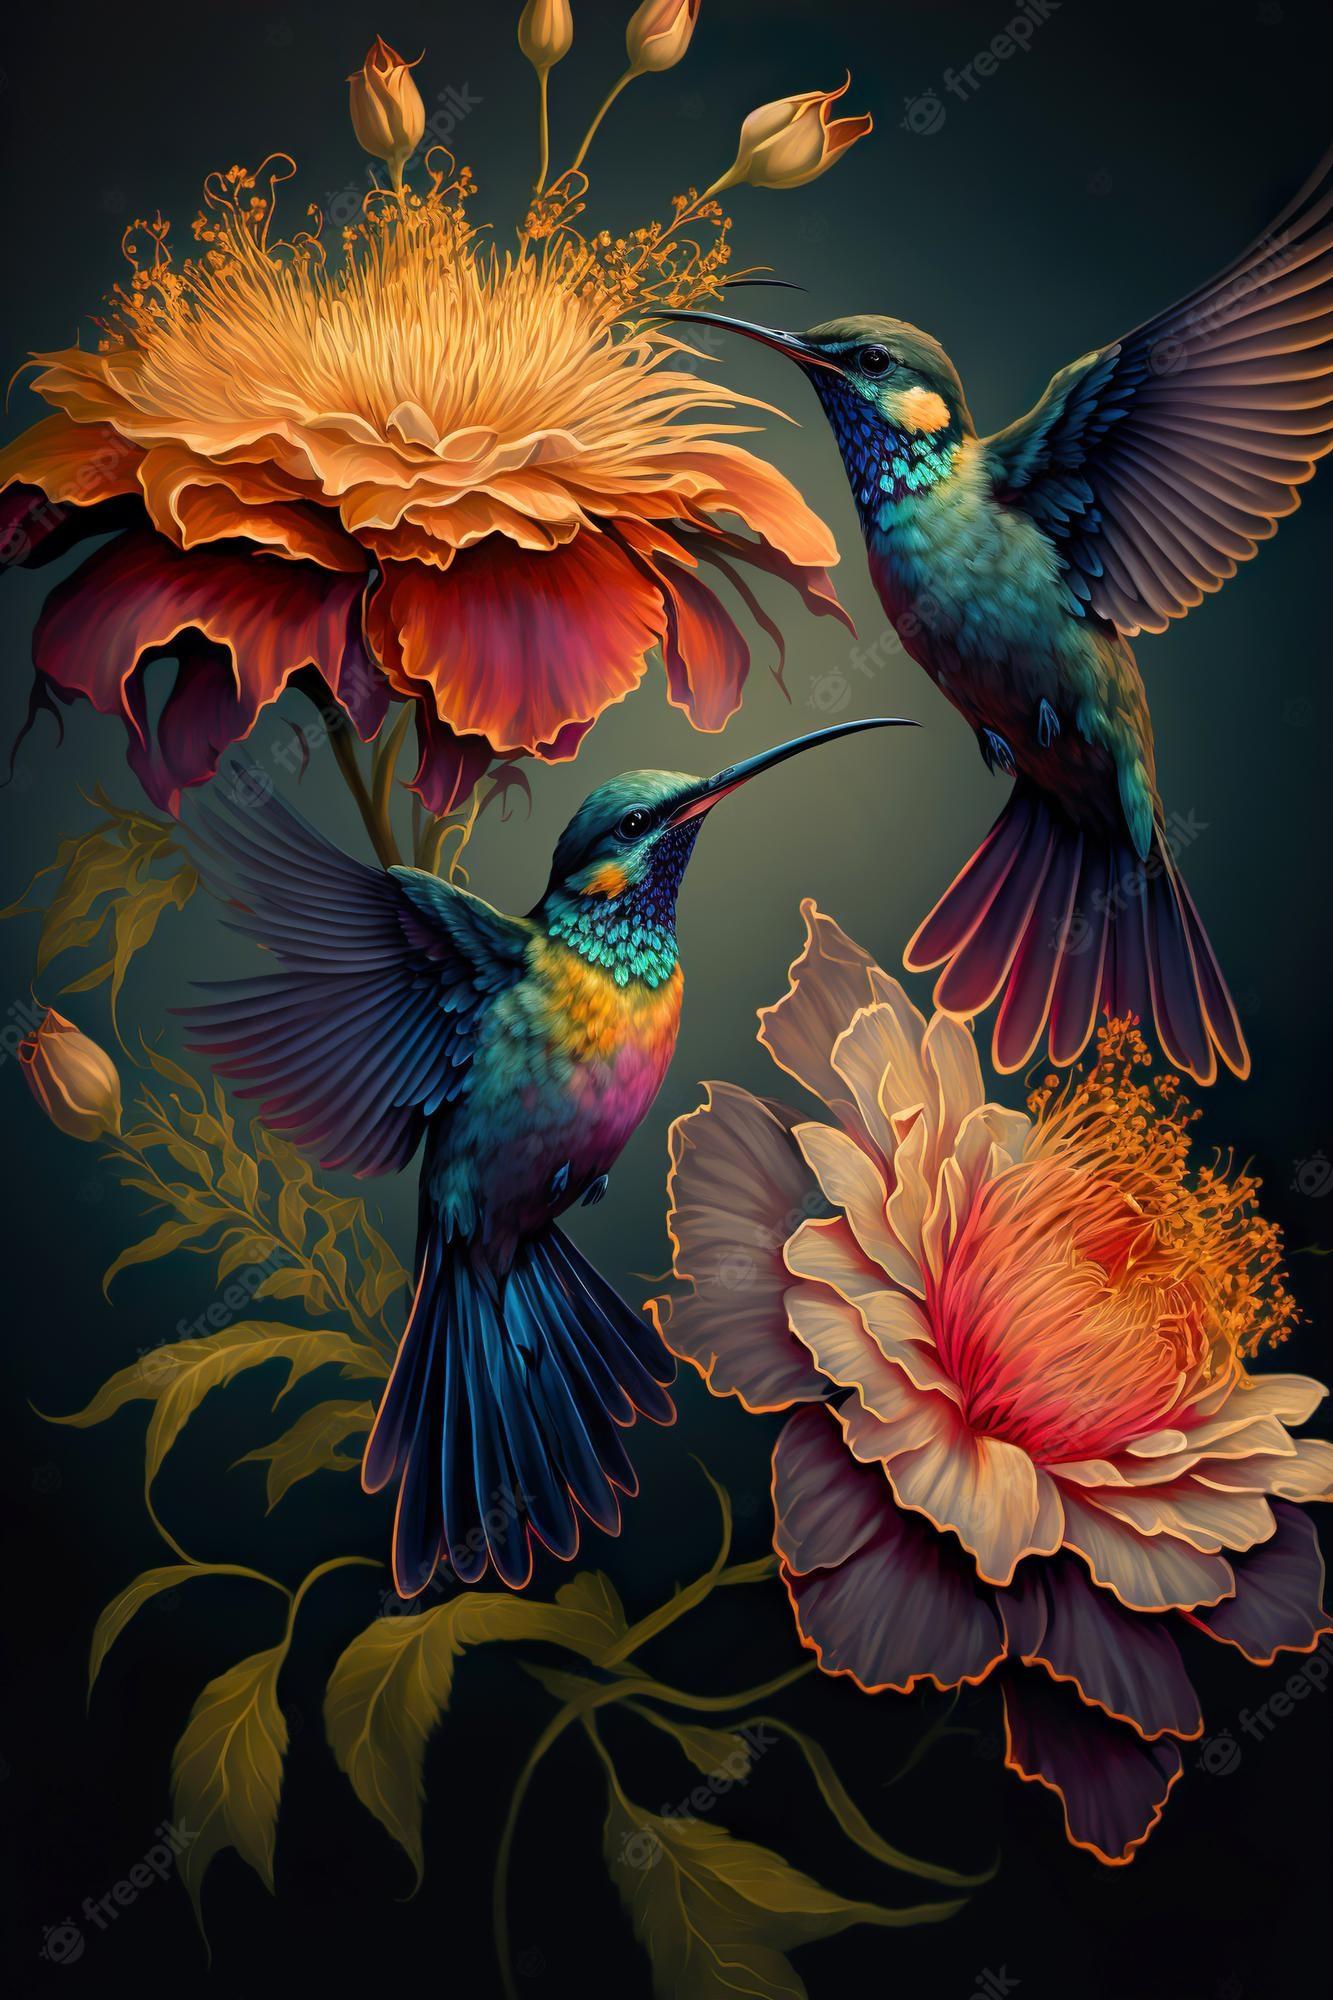 Hummingbirds and Flowers Wallpapers - Top Free Hummingbirds and Flowers ...